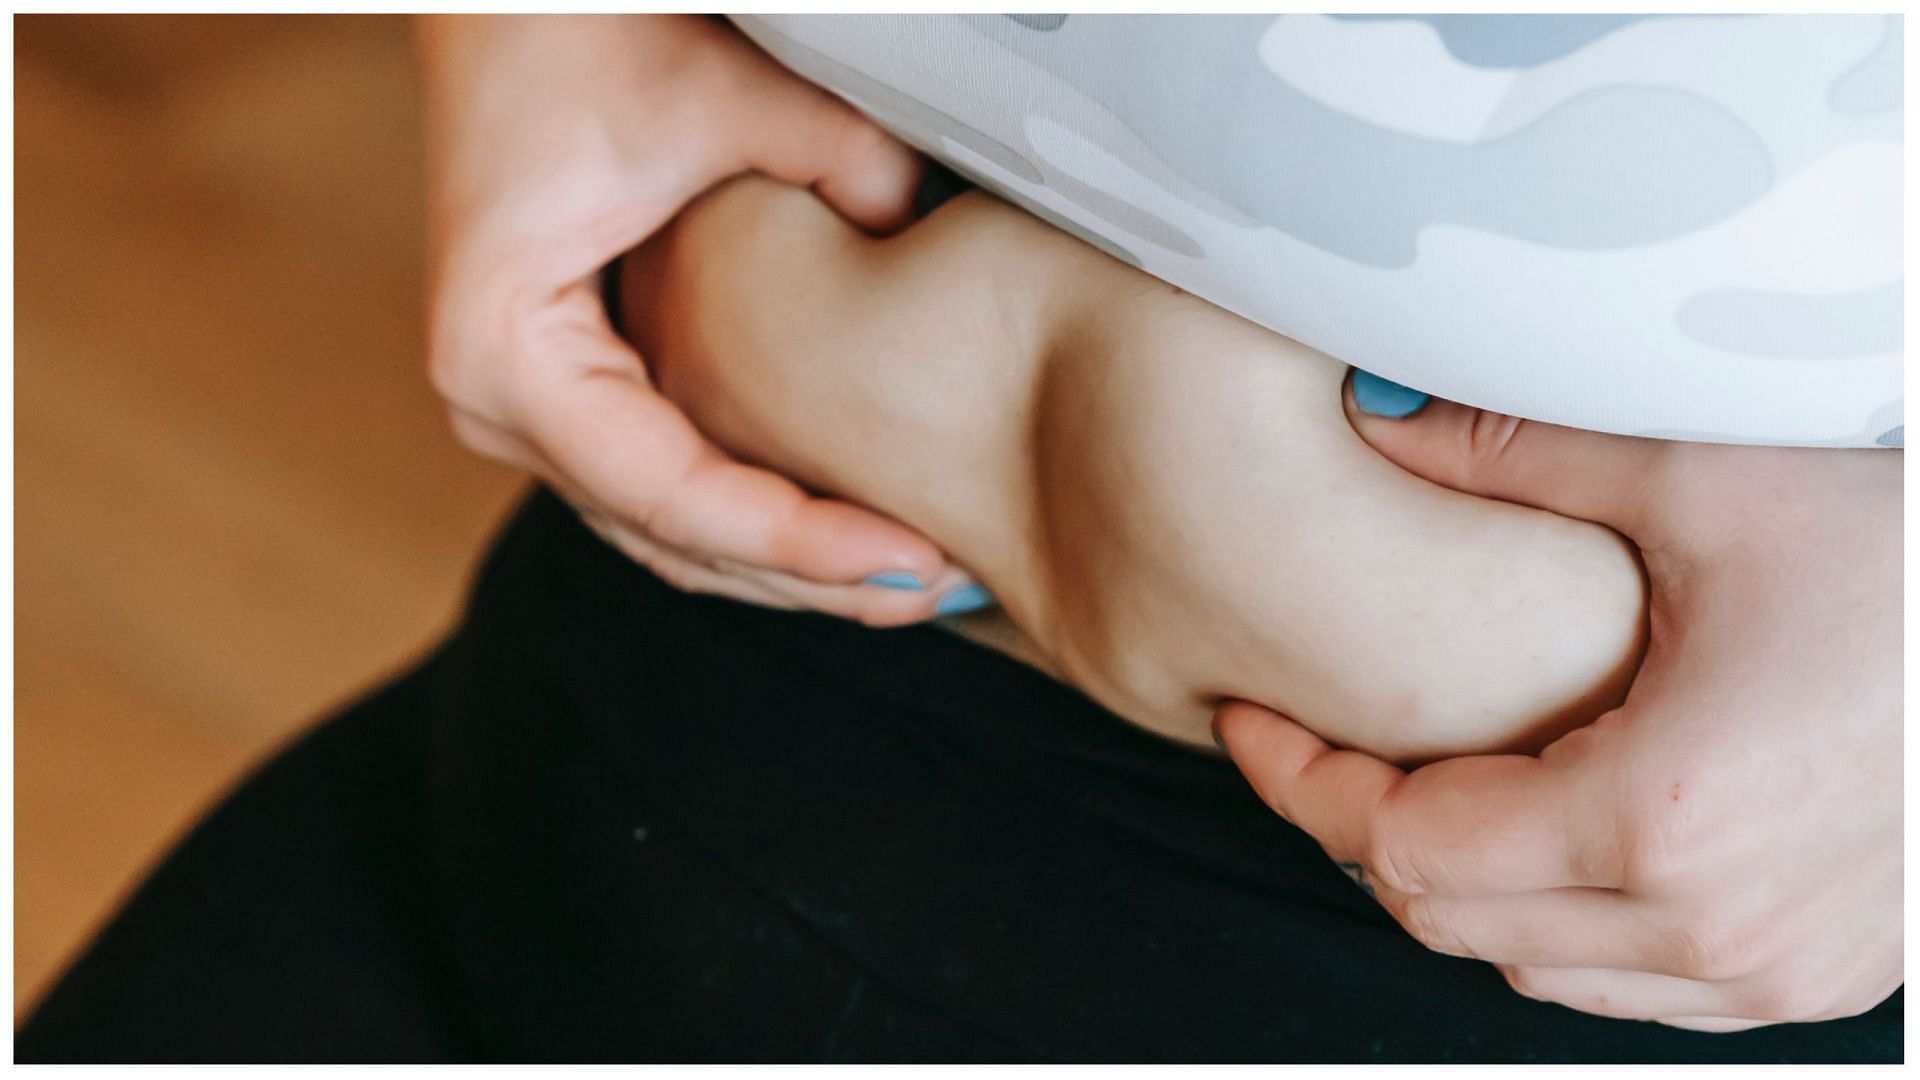 With the right diet and workout, muffin top can be reduced. (Image via Pexels / Andres Aryton)